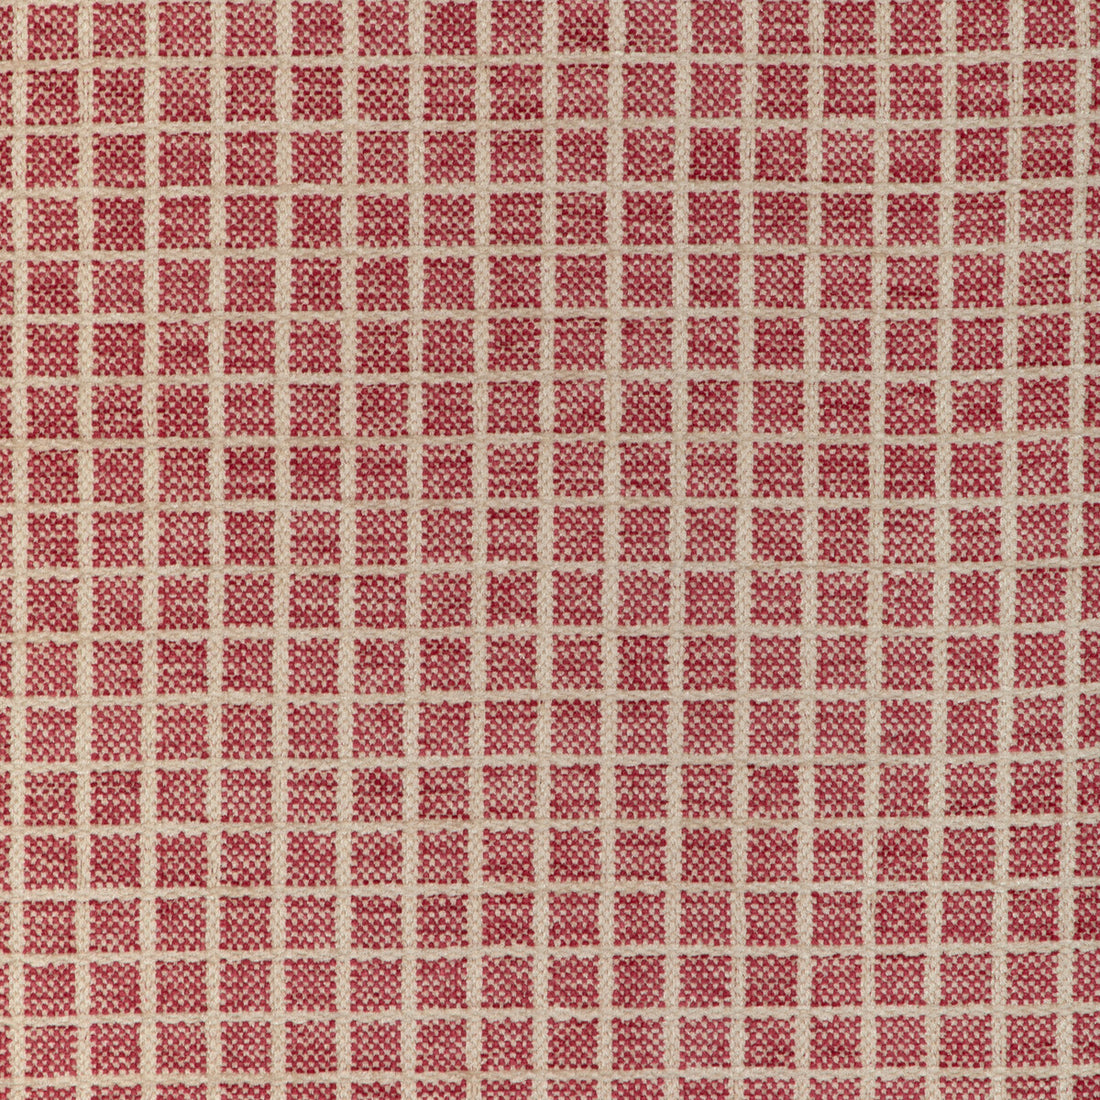 Chiron Texture fabric in berry color - pattern 8023155.97.0 - by Brunschwig &amp; Fils in the Chambery Textures IV collection